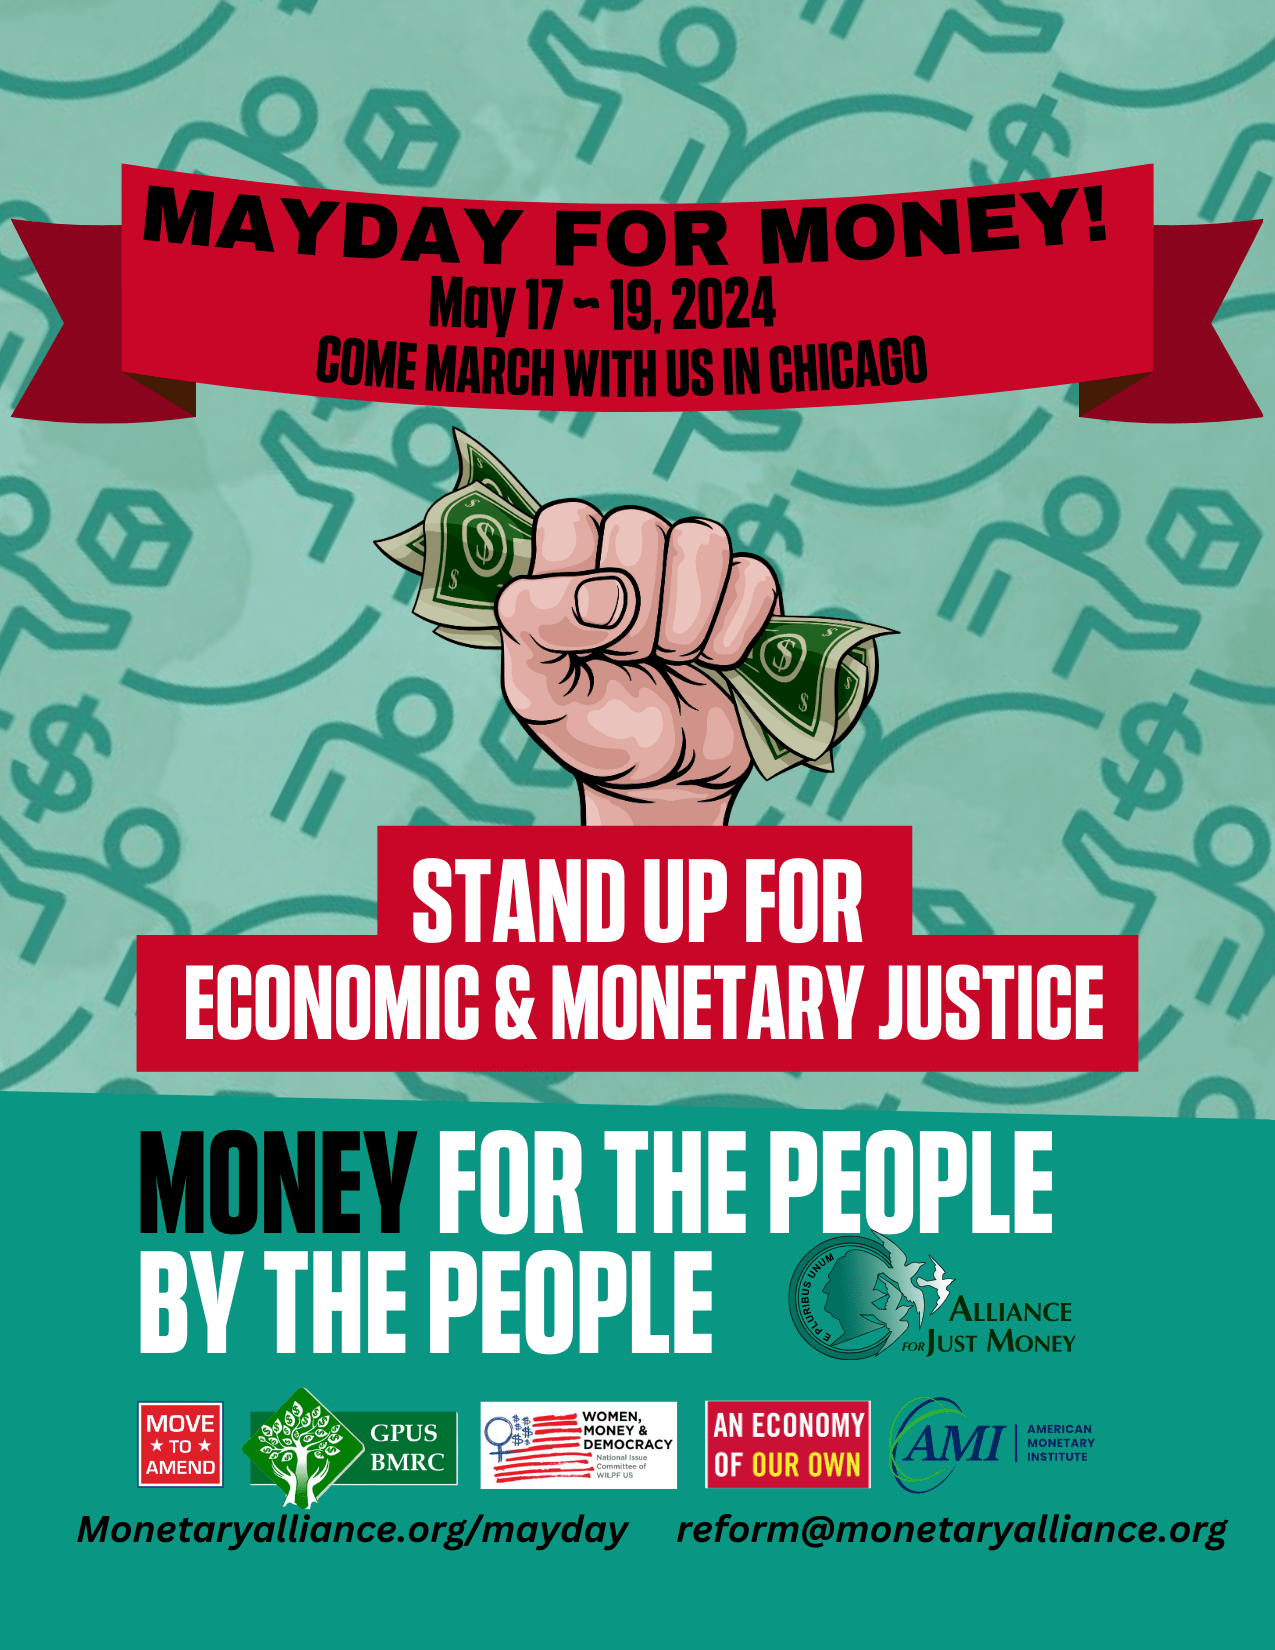 MayDay for Money, May 17-19 Chicago